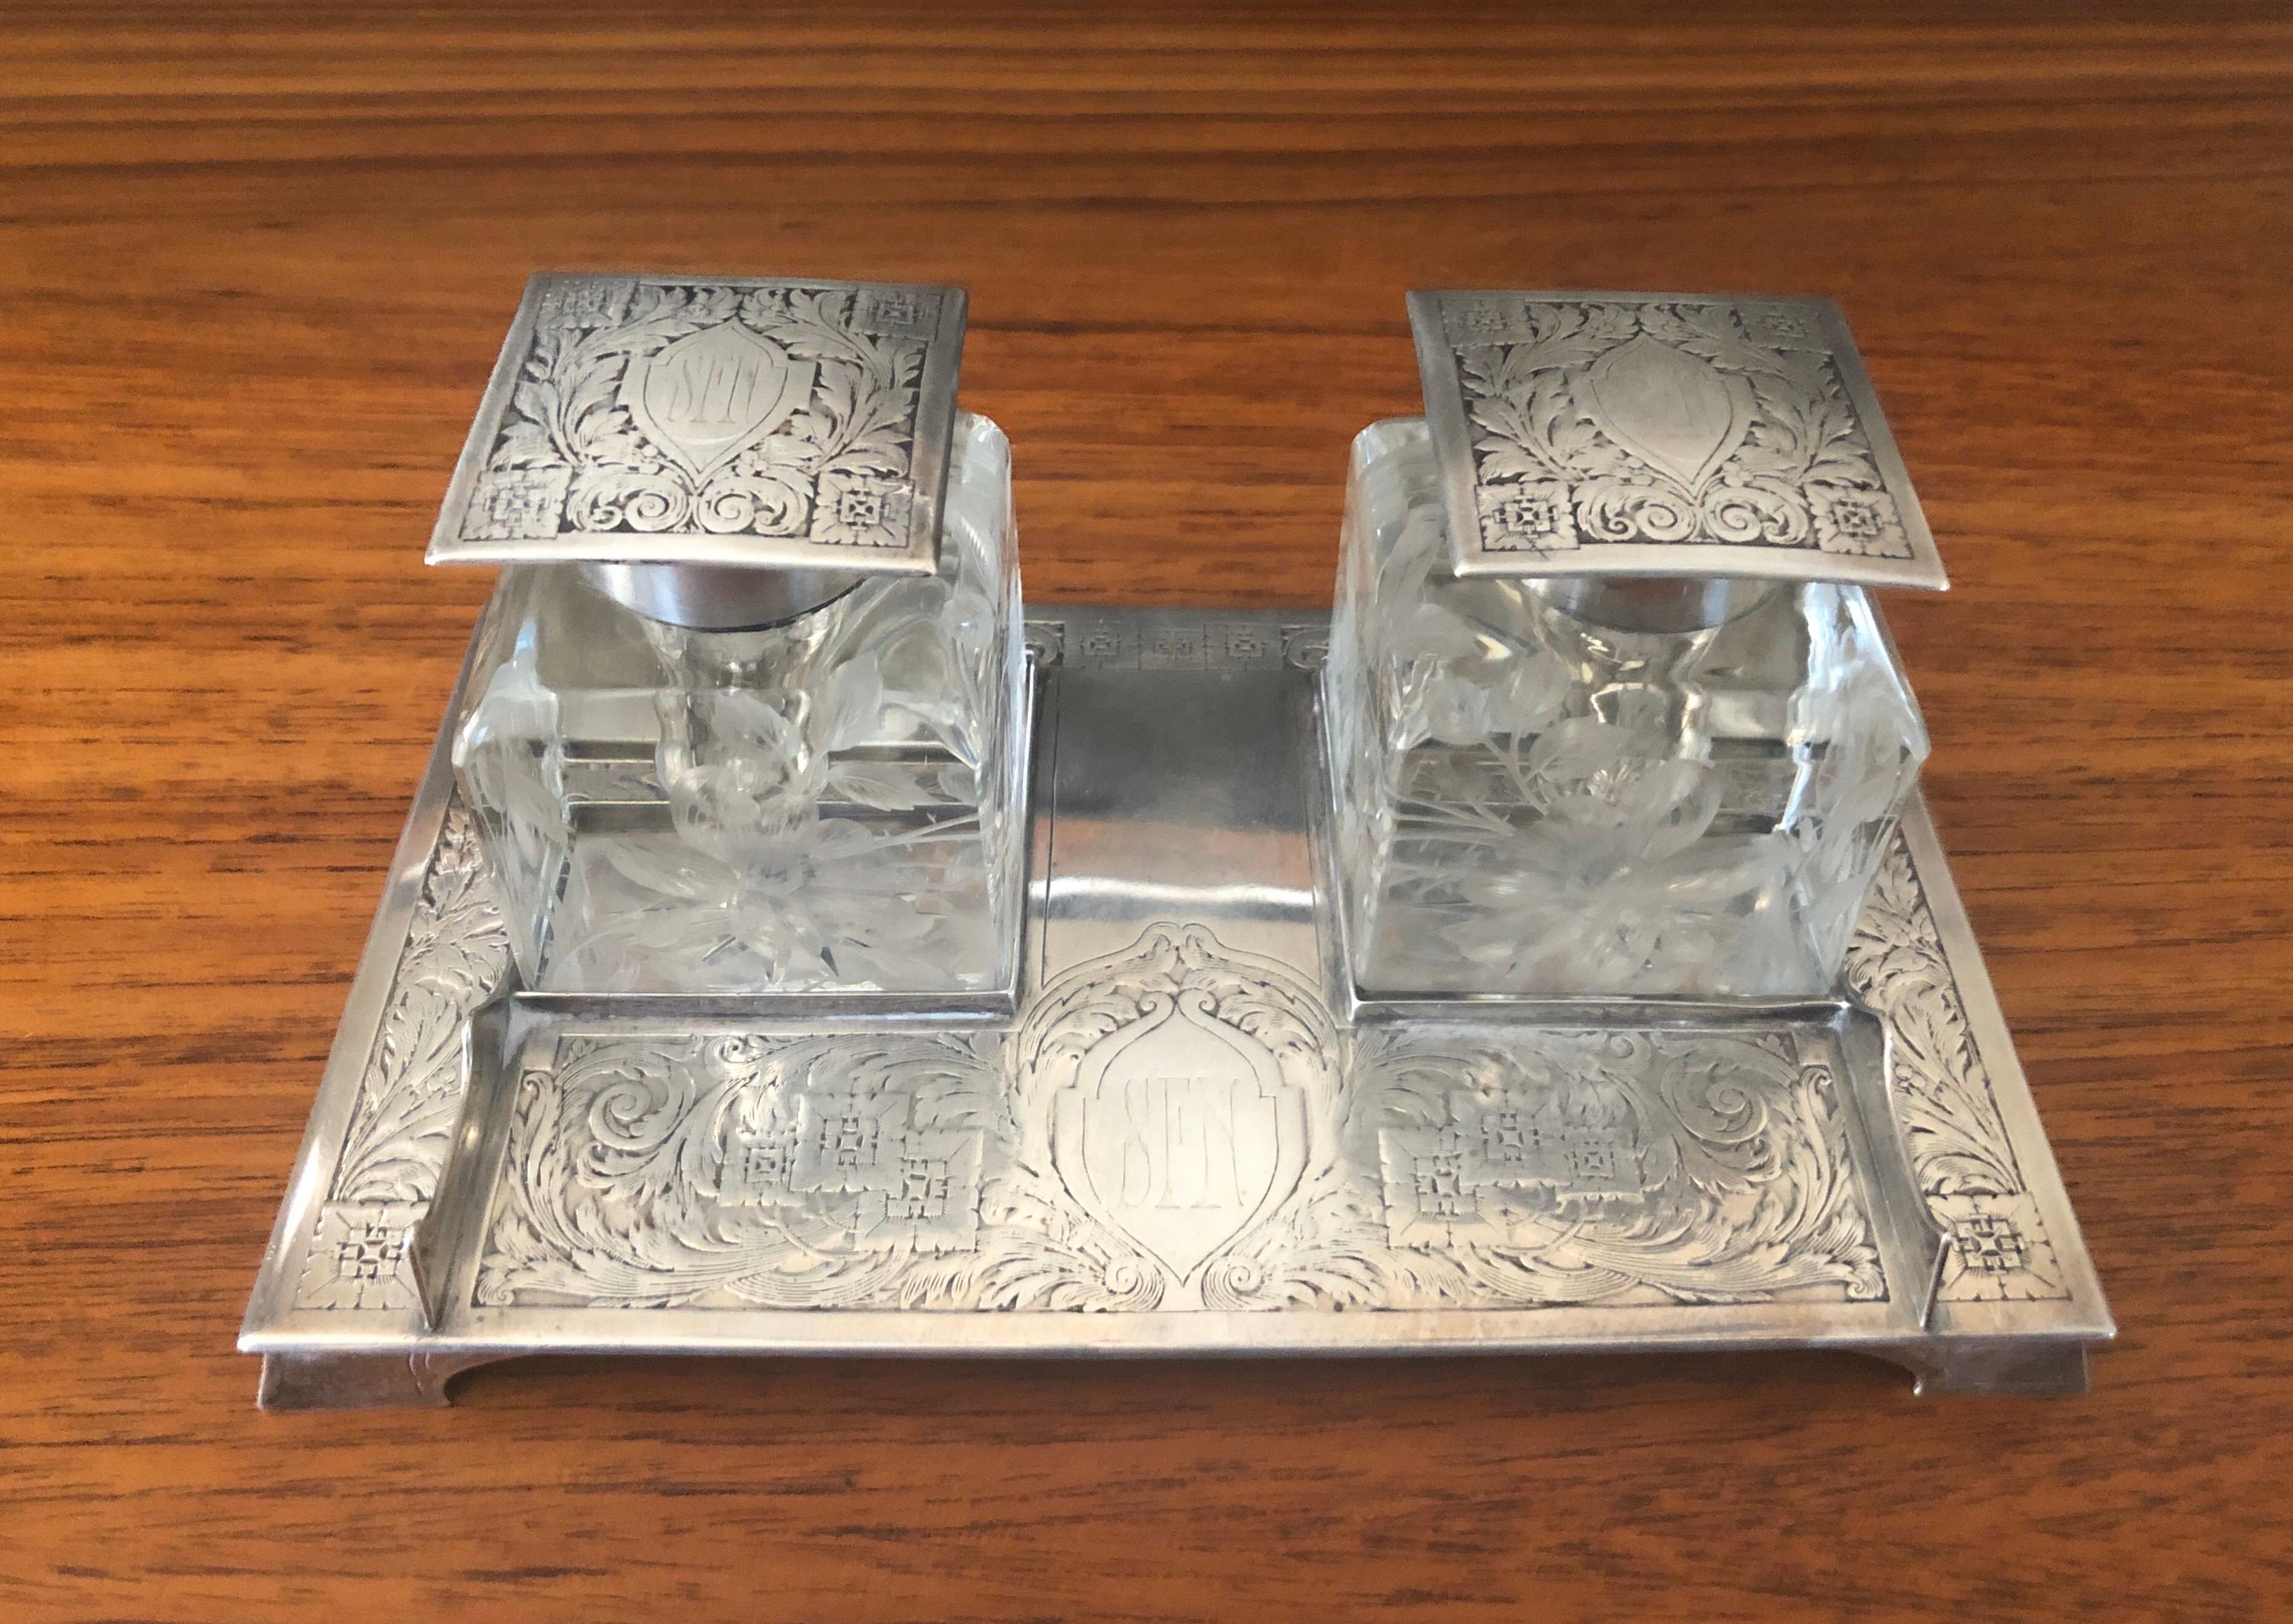 Antique Art Nouveau double inkwell on sterling silver tray by J E Caldwell & Co., circa 1900. This stunning piece features two square crystal wells with etched floral designs in the glass and sterling lids on a heavy solid sterling tray. The piece